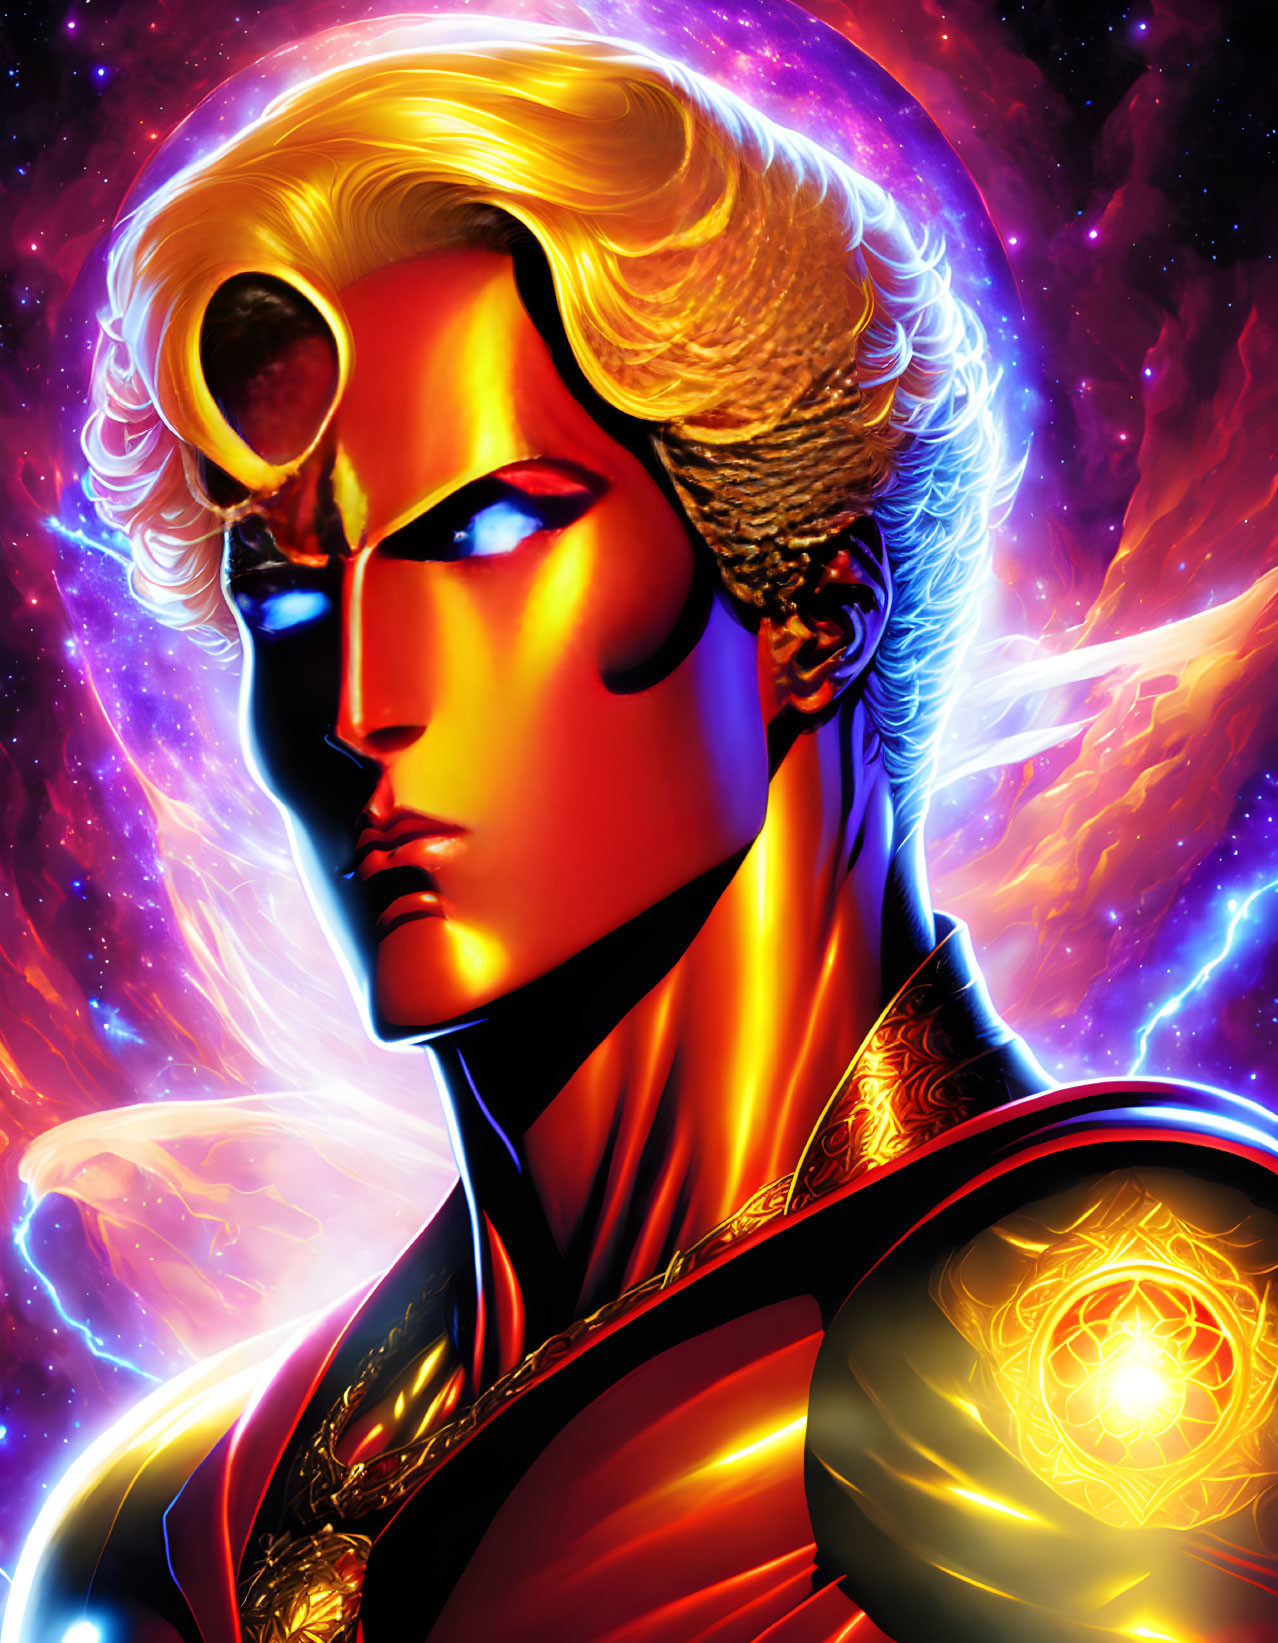 Cosmic superhero with glowing eyes in golden costume against fiery space backdrop